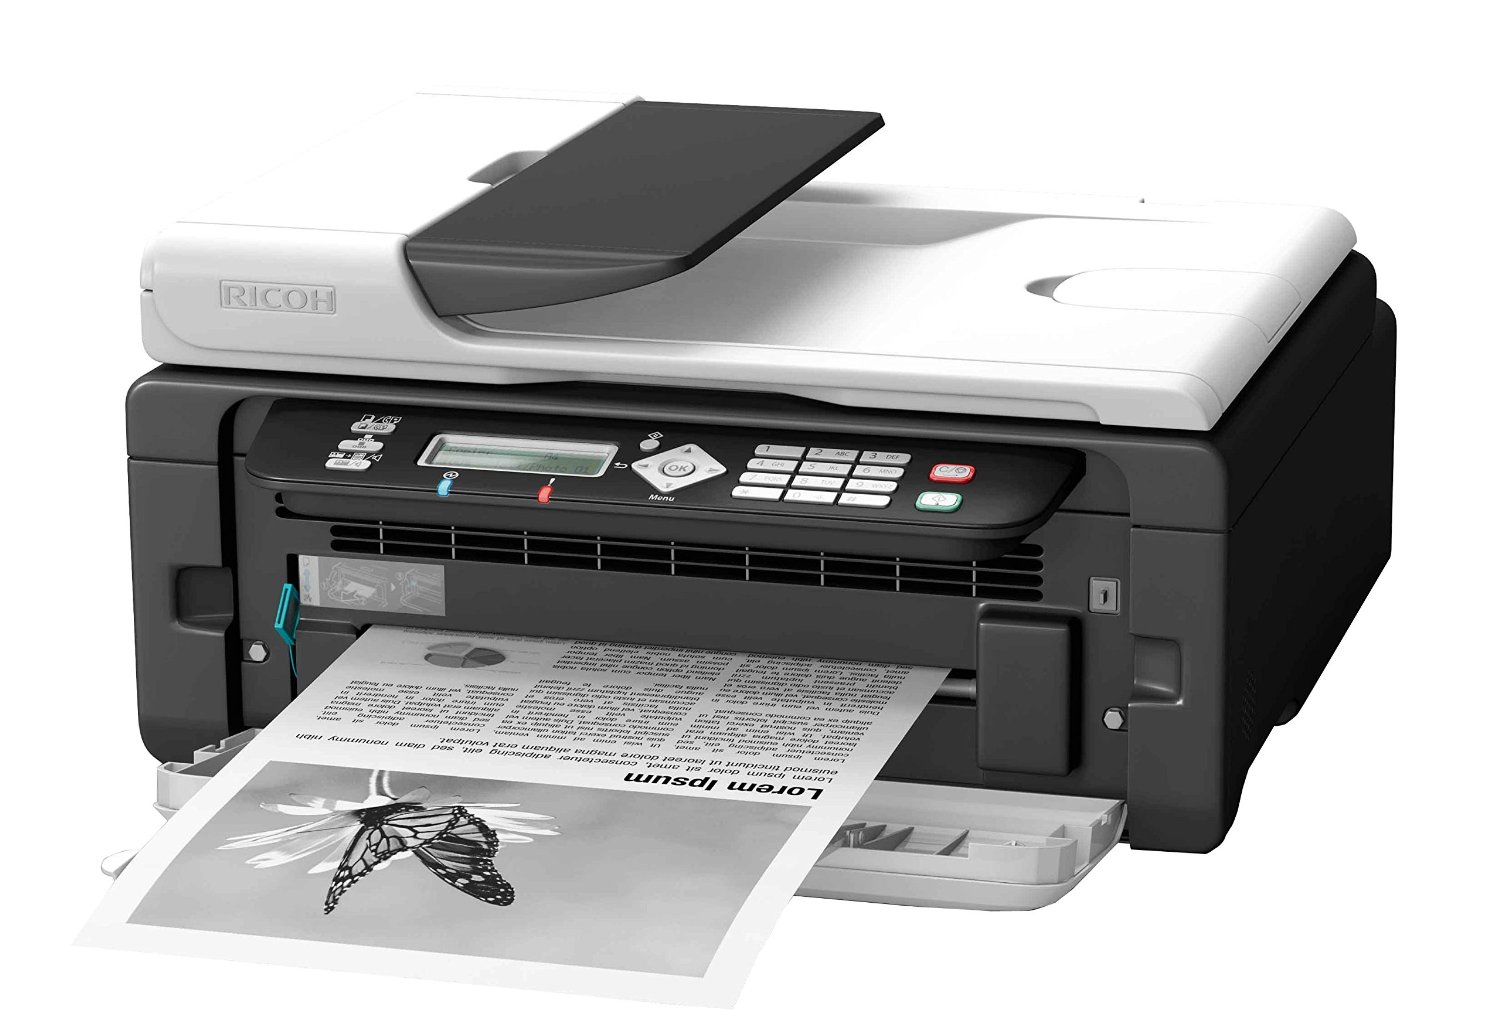 Ricoh sp 100 driver free download